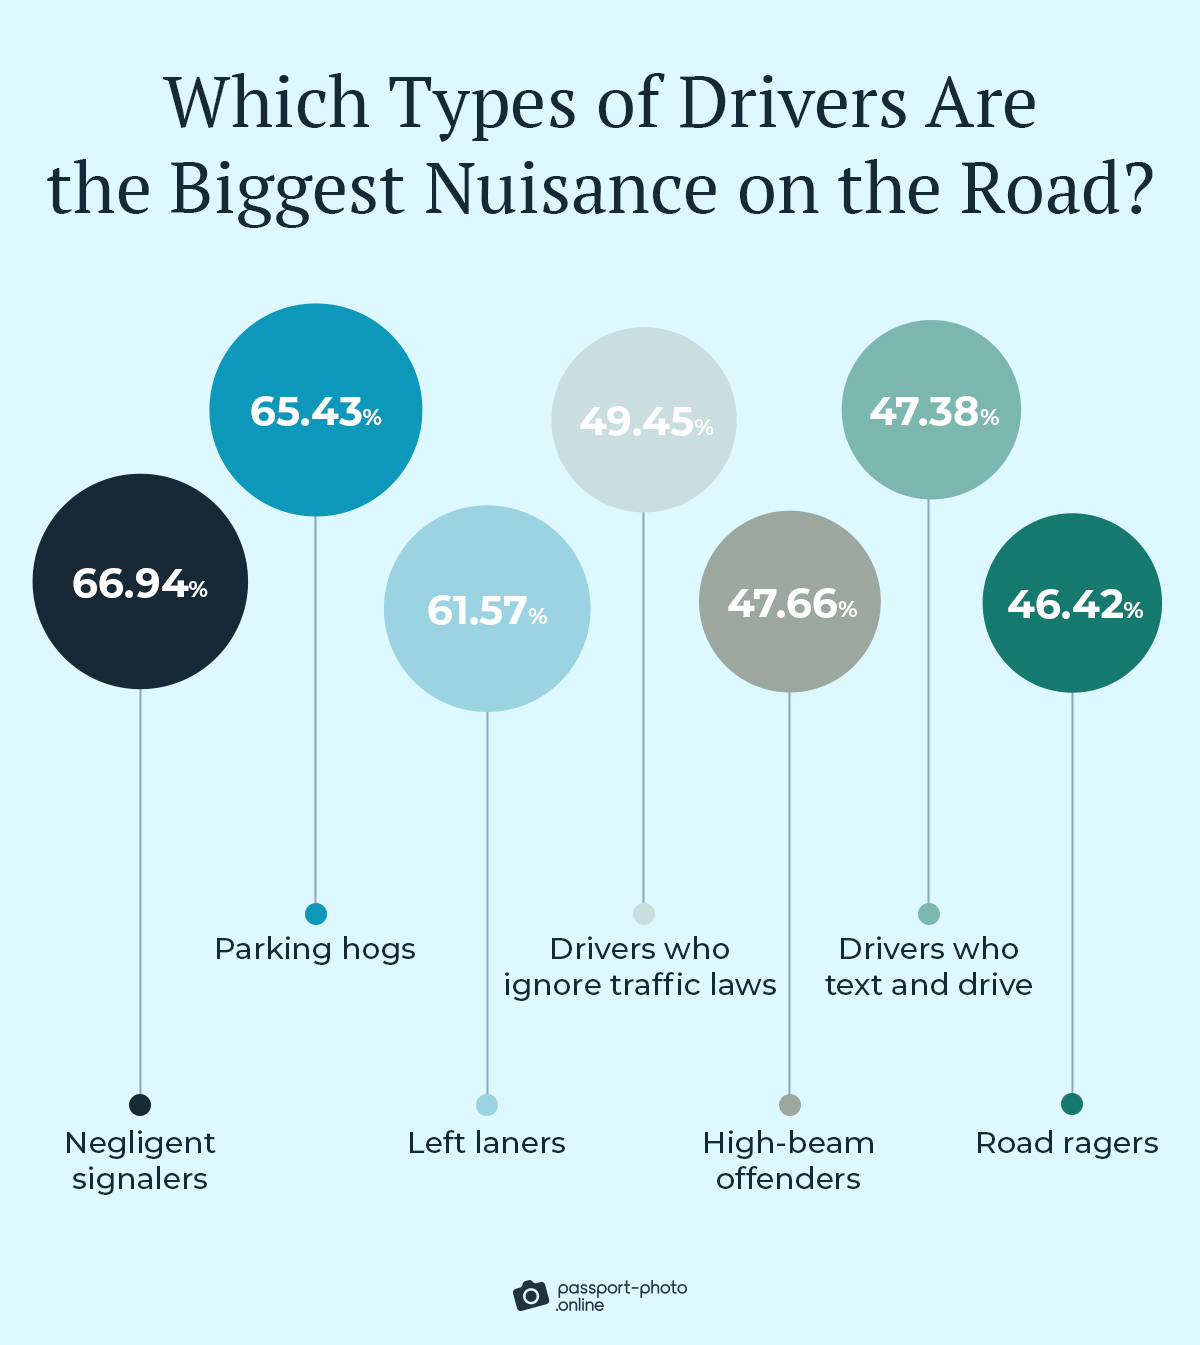 drivers who fail to use turn signals or misuse them are the biggest annoyance at 66.94%